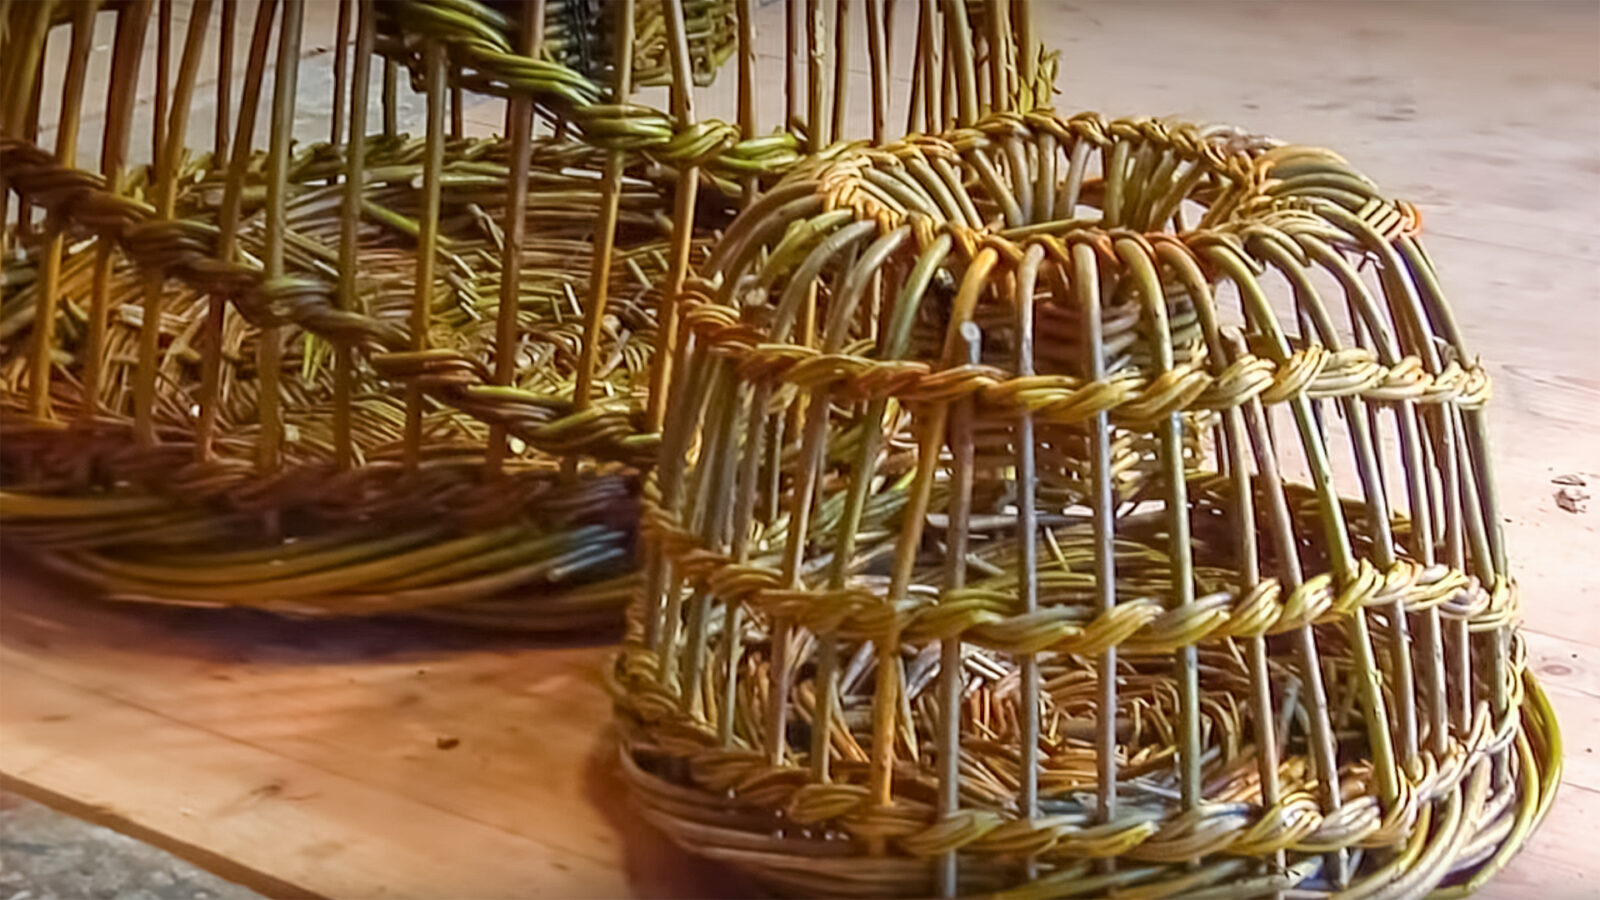 Lobster and crab pots made of willow like a basket